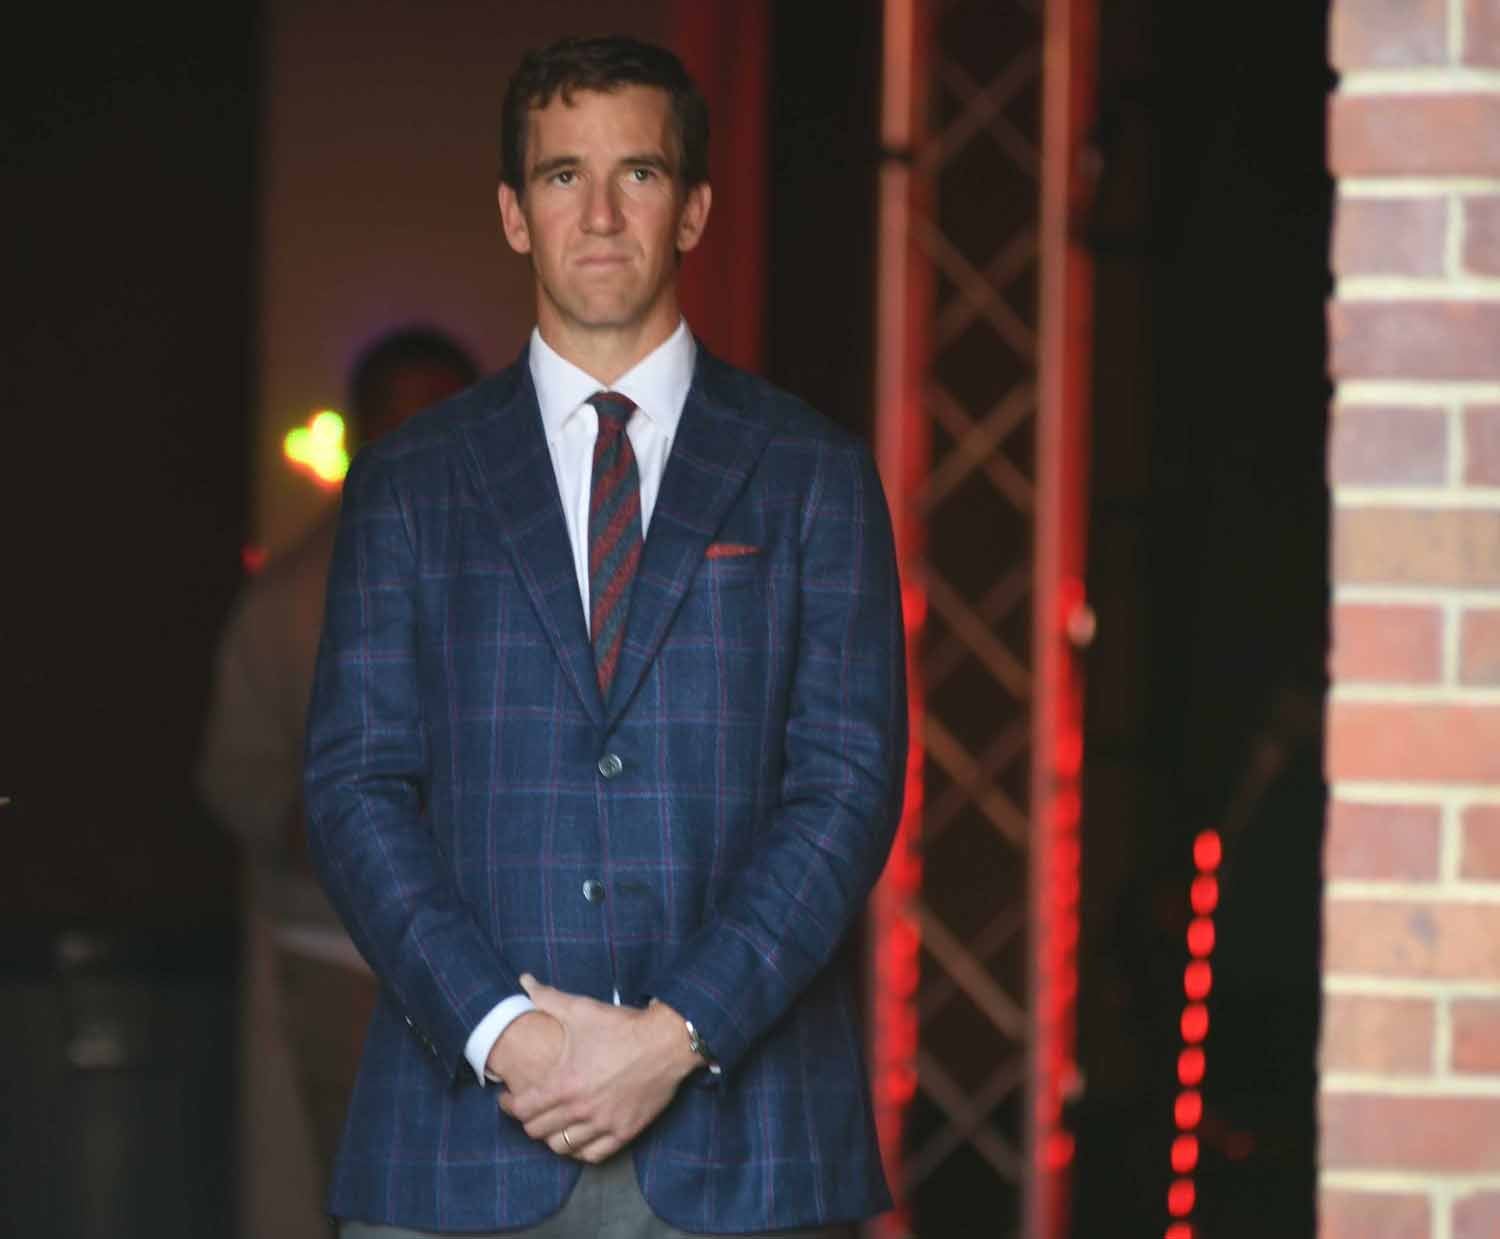 See Eli Manning's No. 10 jersey retired by Ole Miss football